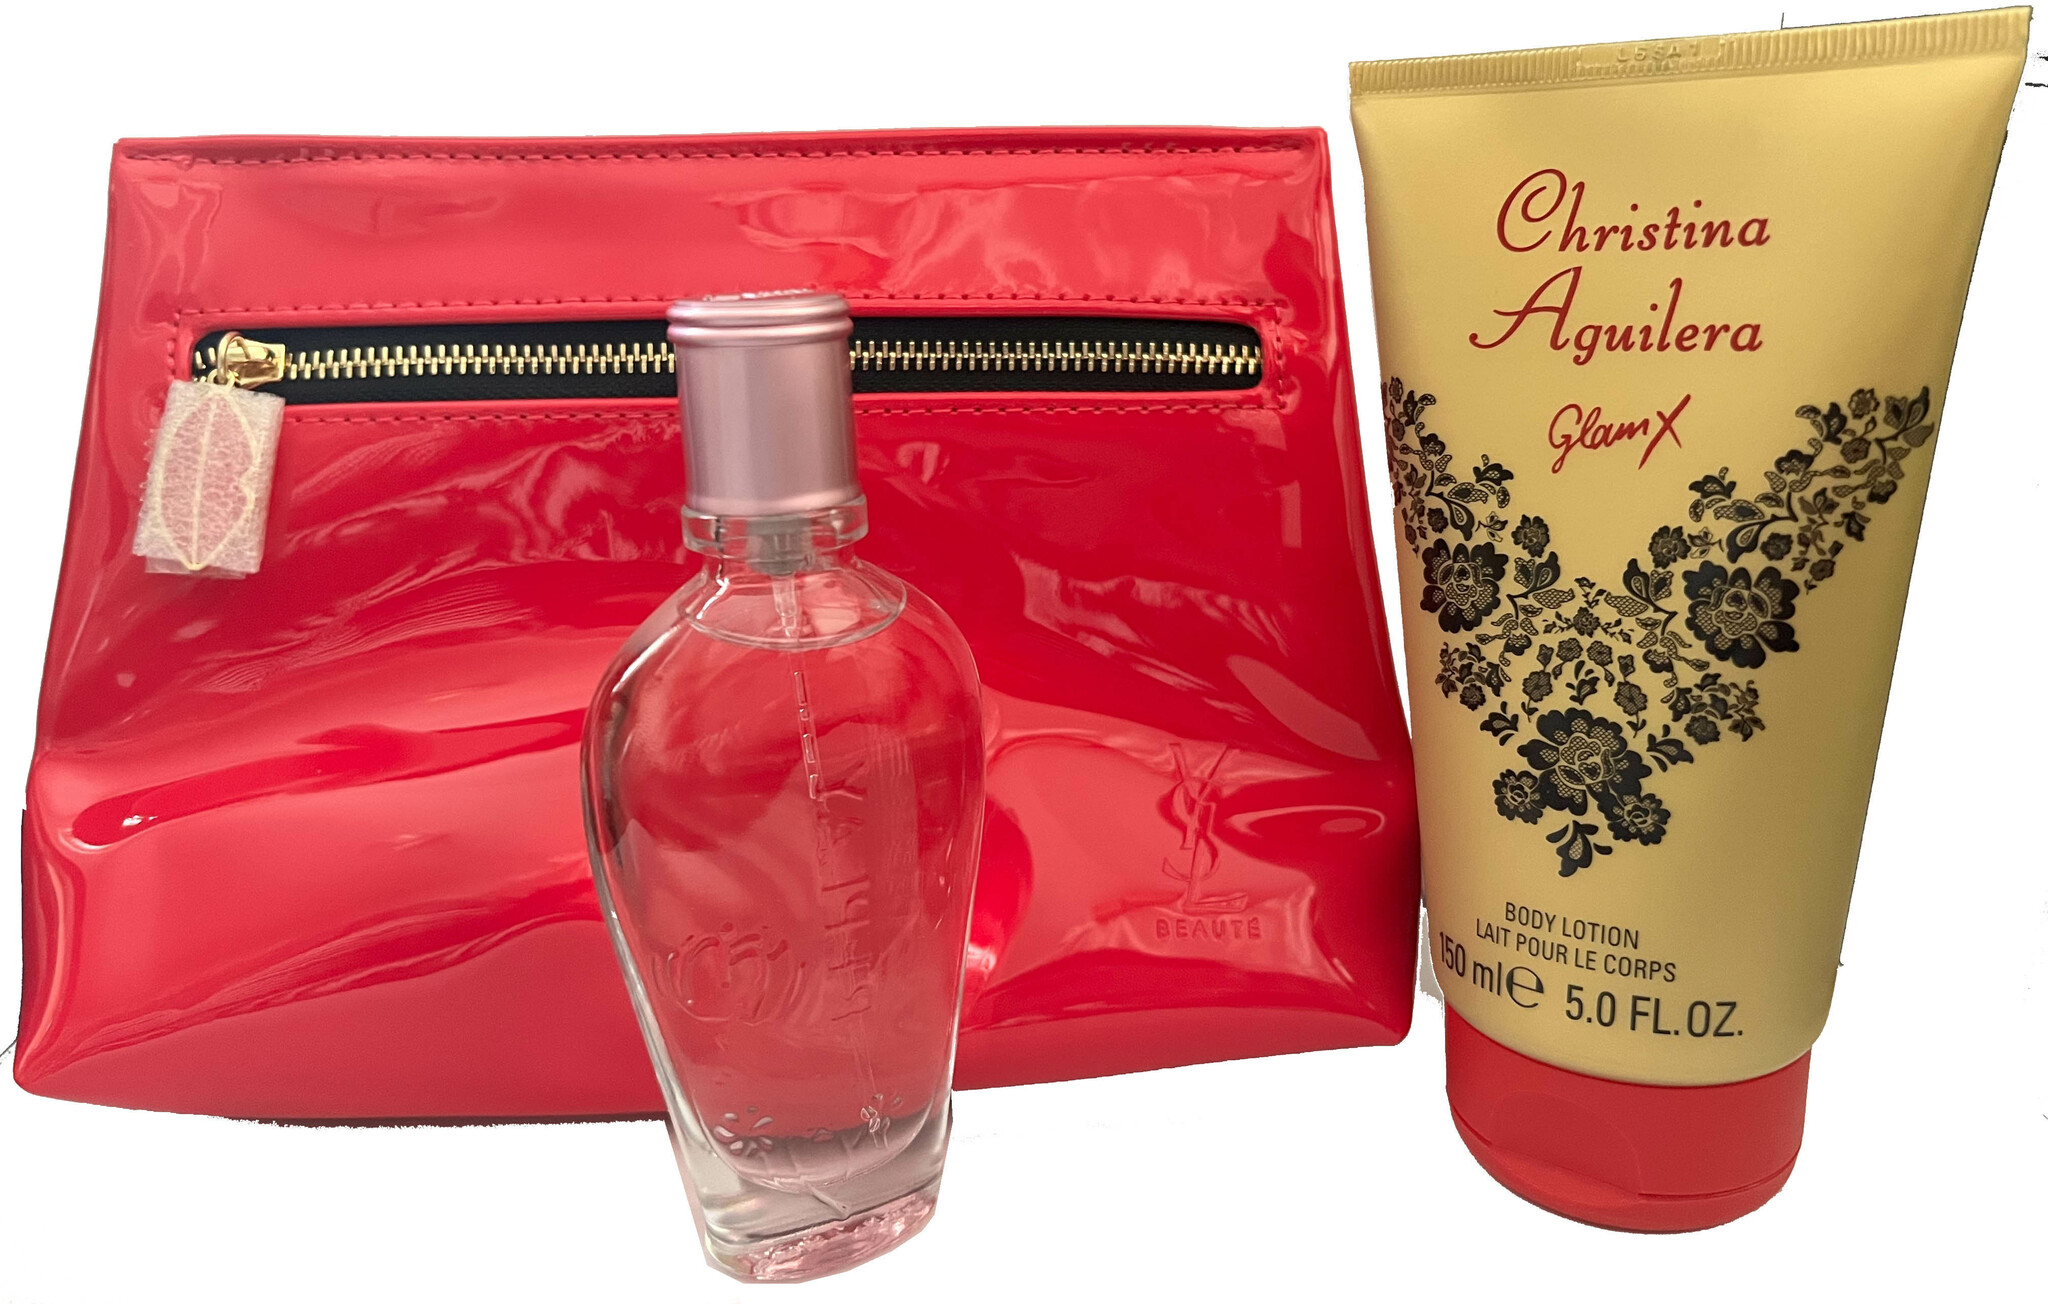 Replay Jean Spirit Giftset-EDT40ml+YSL Pink Purse+Glam X Lotion